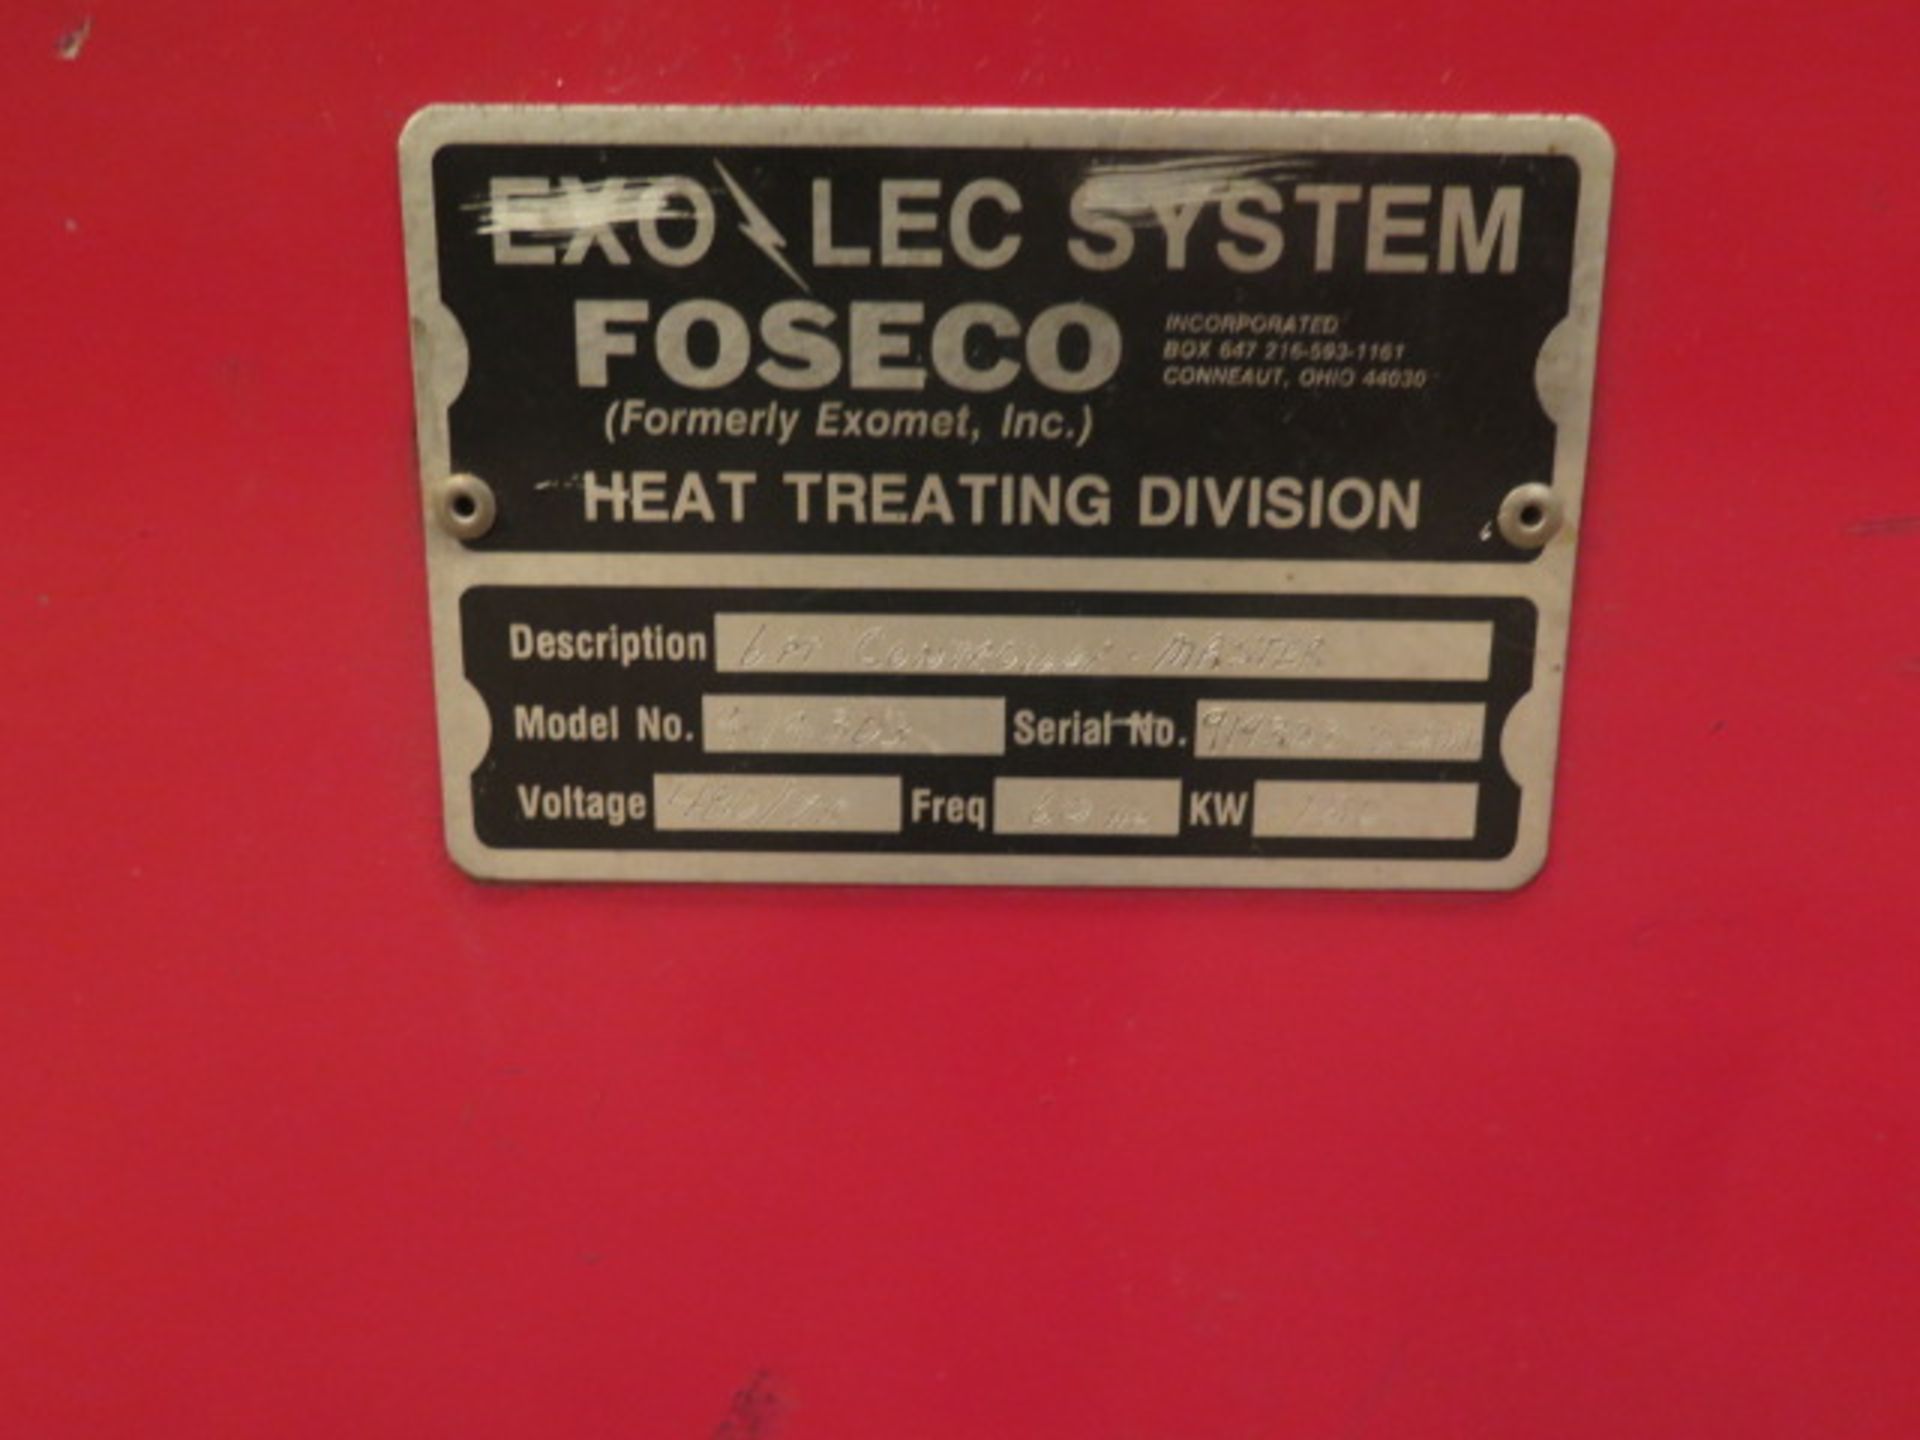 Fesco Heat Treat Division XLO/LEC System “6-Point Controller Slave” 120kW 6-Station Blanket Heater - Image 4 of 4